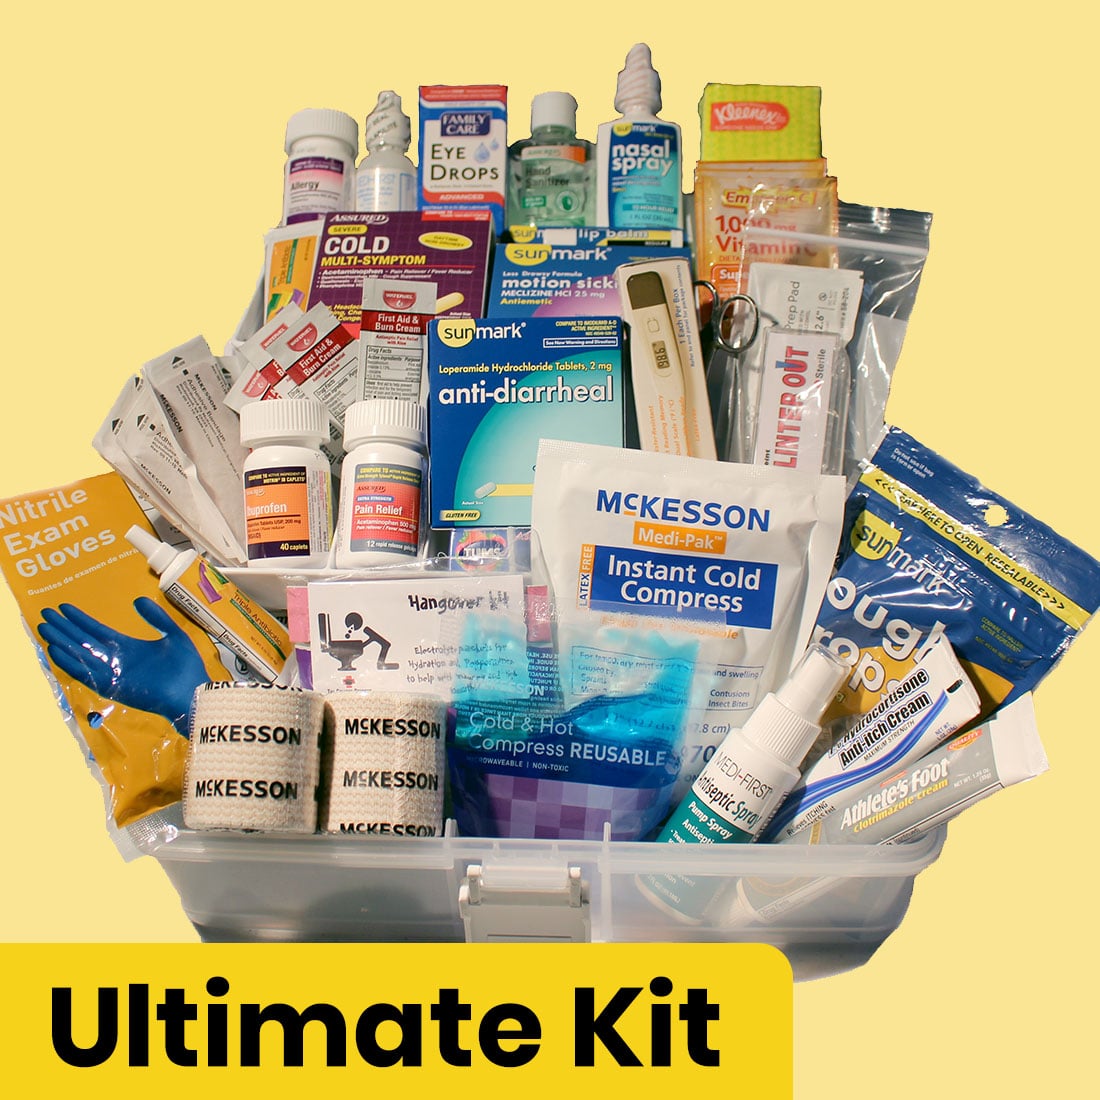 The College Student First Aid Kit is individually assembled and uniquely created for the specific needs of college students. Developed by a college clinic nurse practitioner, the kit is comprehensive, well organized, and affordable. With over 30 different medications, ointments, creams, drops, tools, and wound care items, The College Student First Aid Kit will make your student’s college life… Healthier, Safer, and Smarter.